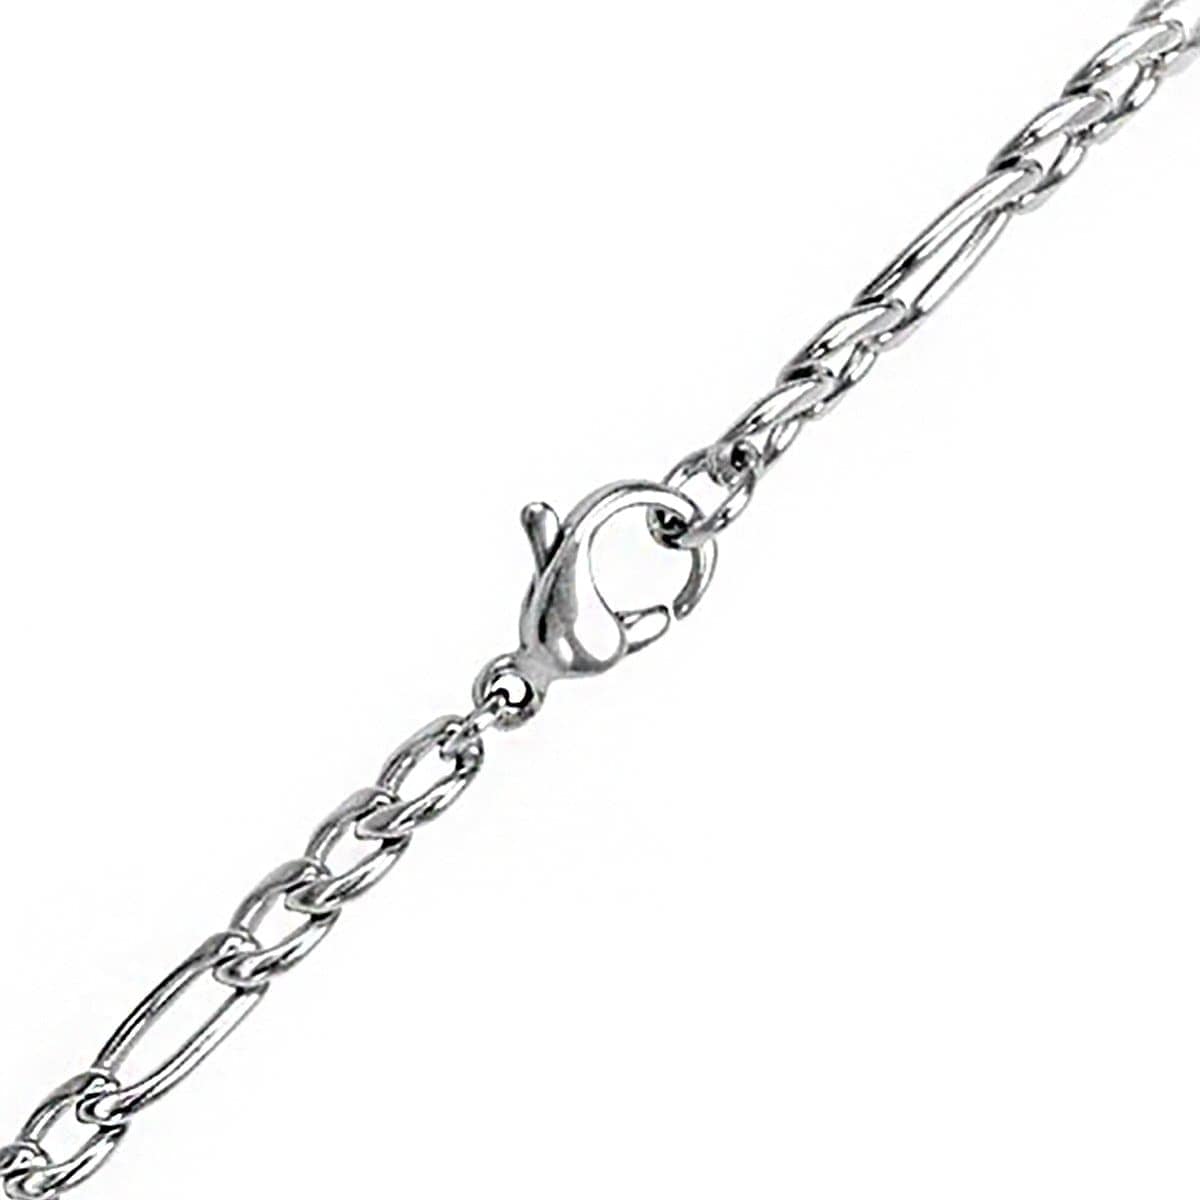 INOX JEWELRY Chains Silver Tone Stainless Steel 3mm Figaro Polished Chain